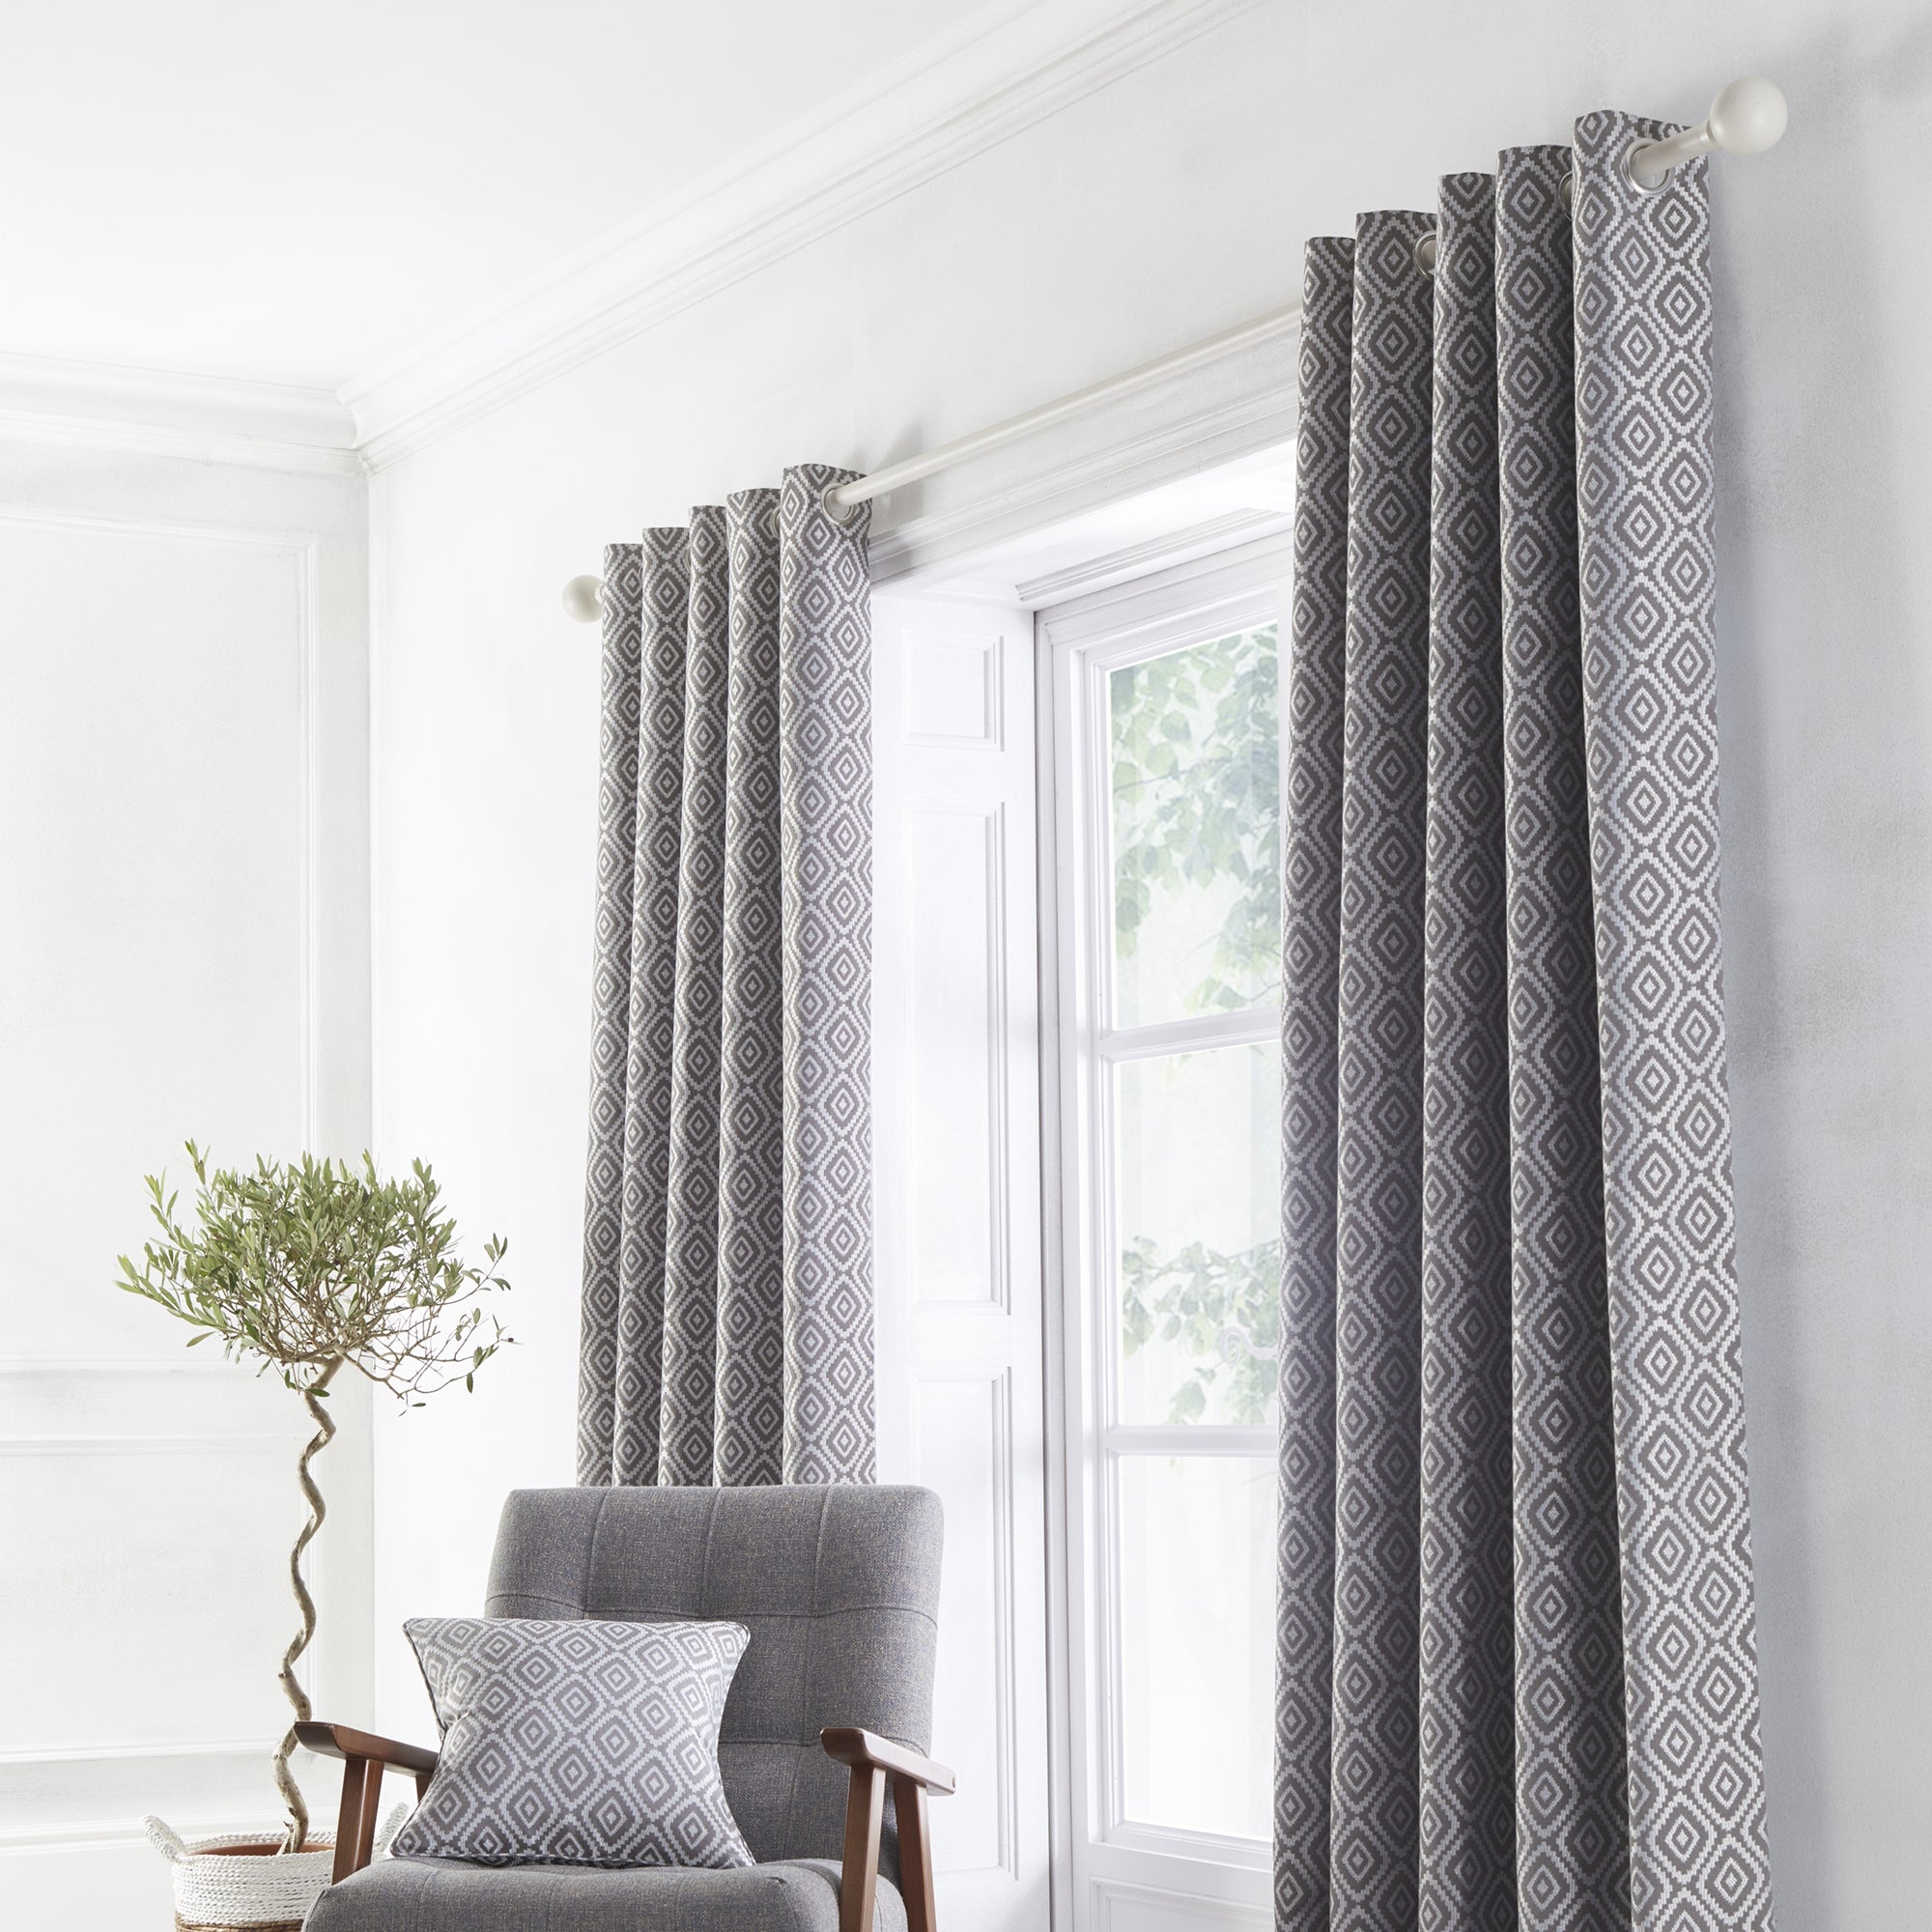 Asha - Jacquard Pair of Eyelet Curtains in Slate - By Appletree Loft